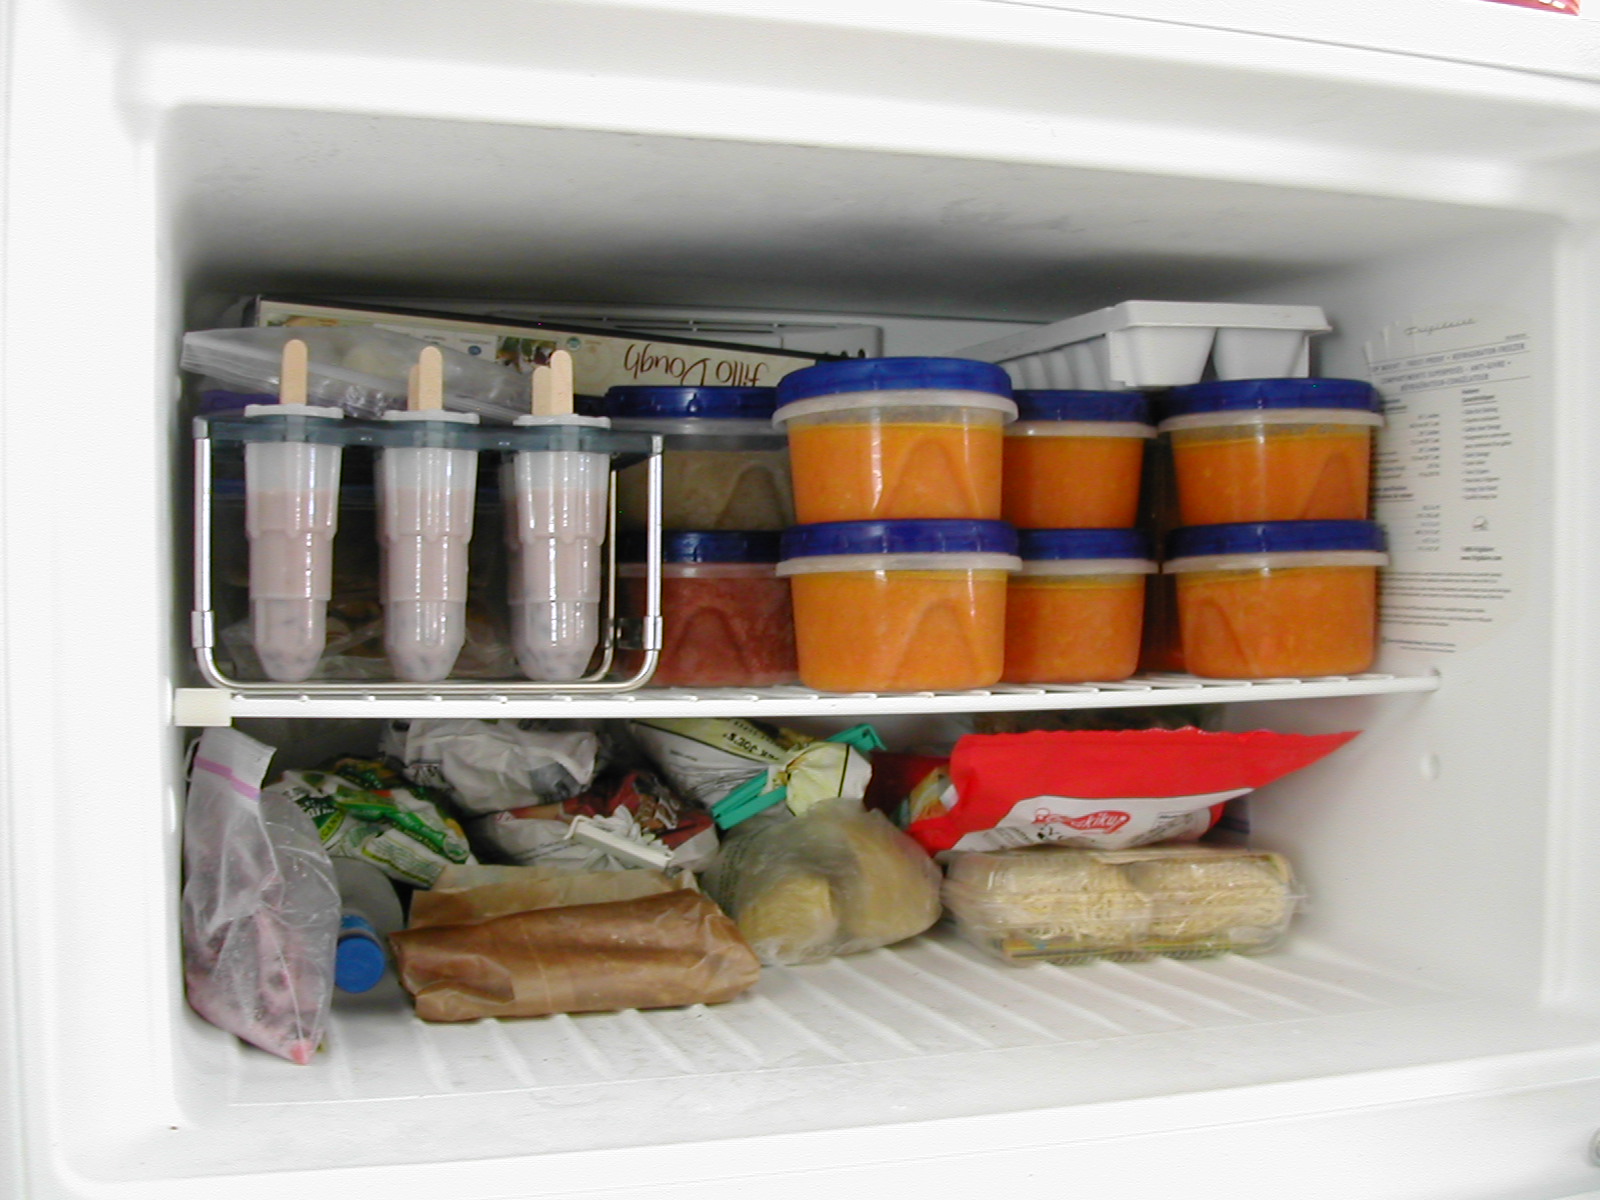 How to Declutter Your Freezer! containers cleaning baking soda organize frozen food2